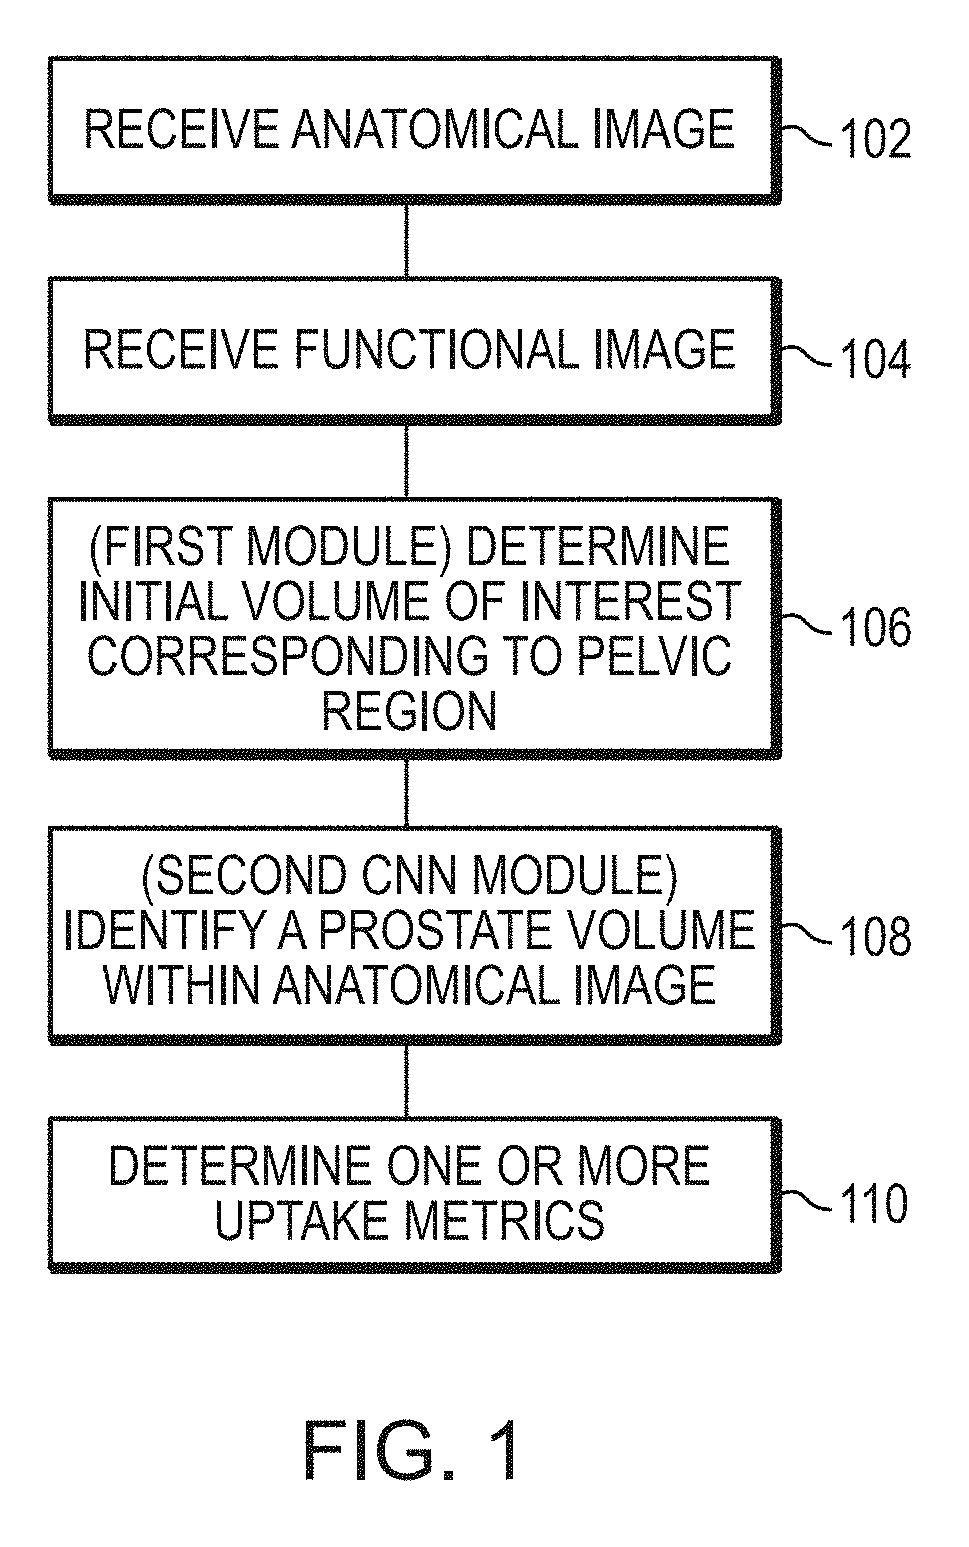 Systems and methods for rapid neural network-based image segmentation and radiopharmaceutical uptake determination